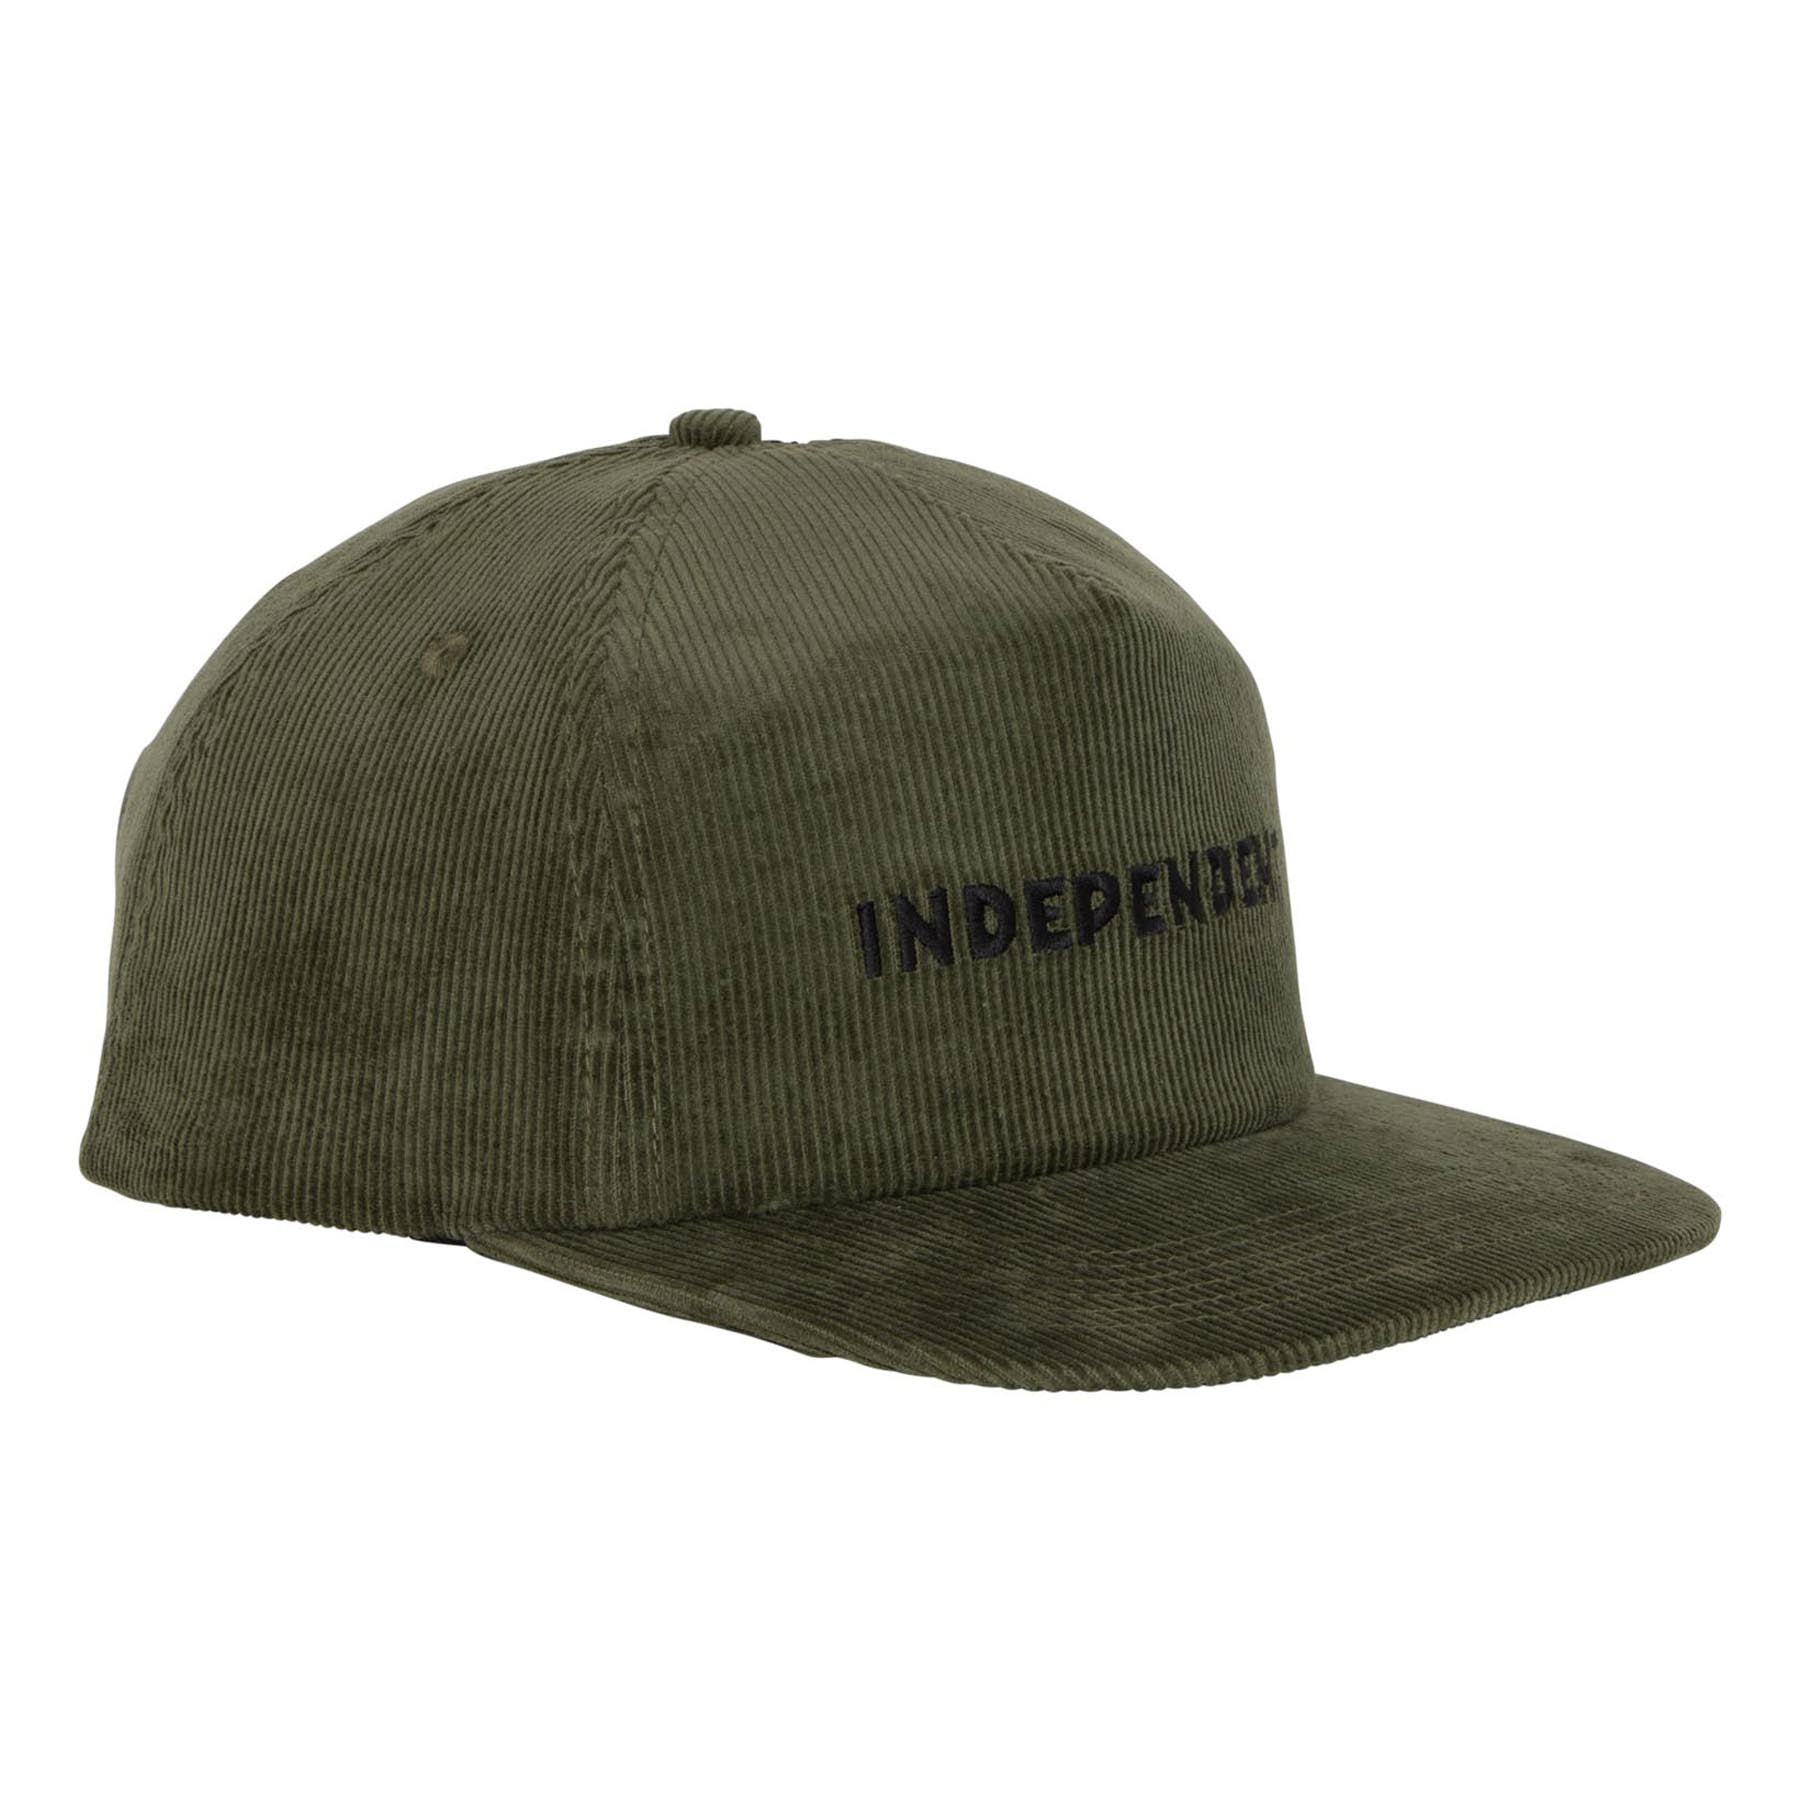 Independent Beacon Snapback Unstructured Mid Hat Olive OS Unisex - Invisible Board Shop